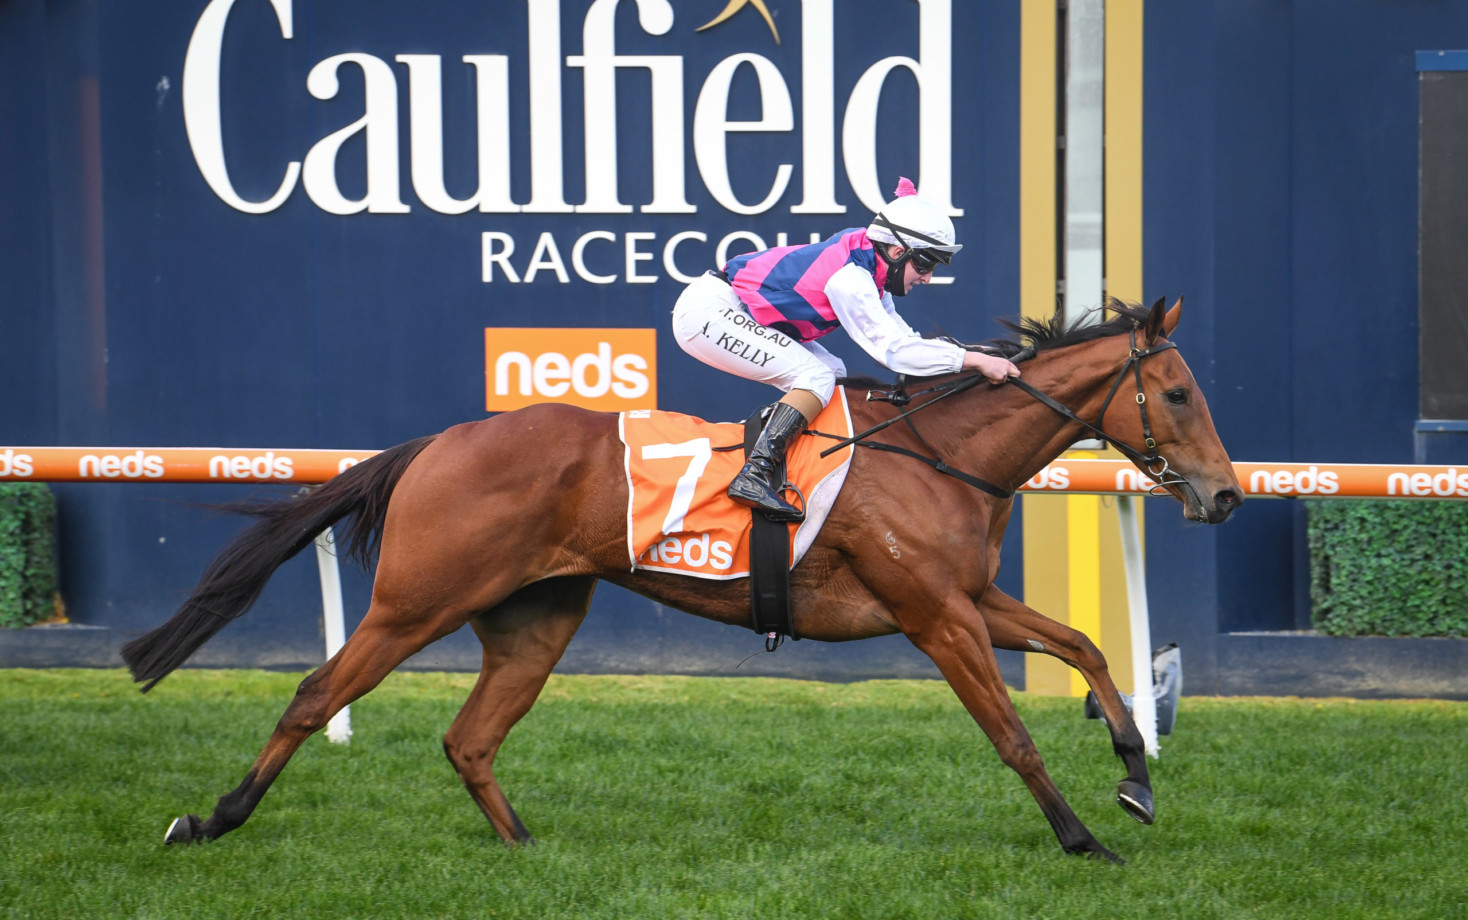 King Magnus registers second consecutive win at Caulfield